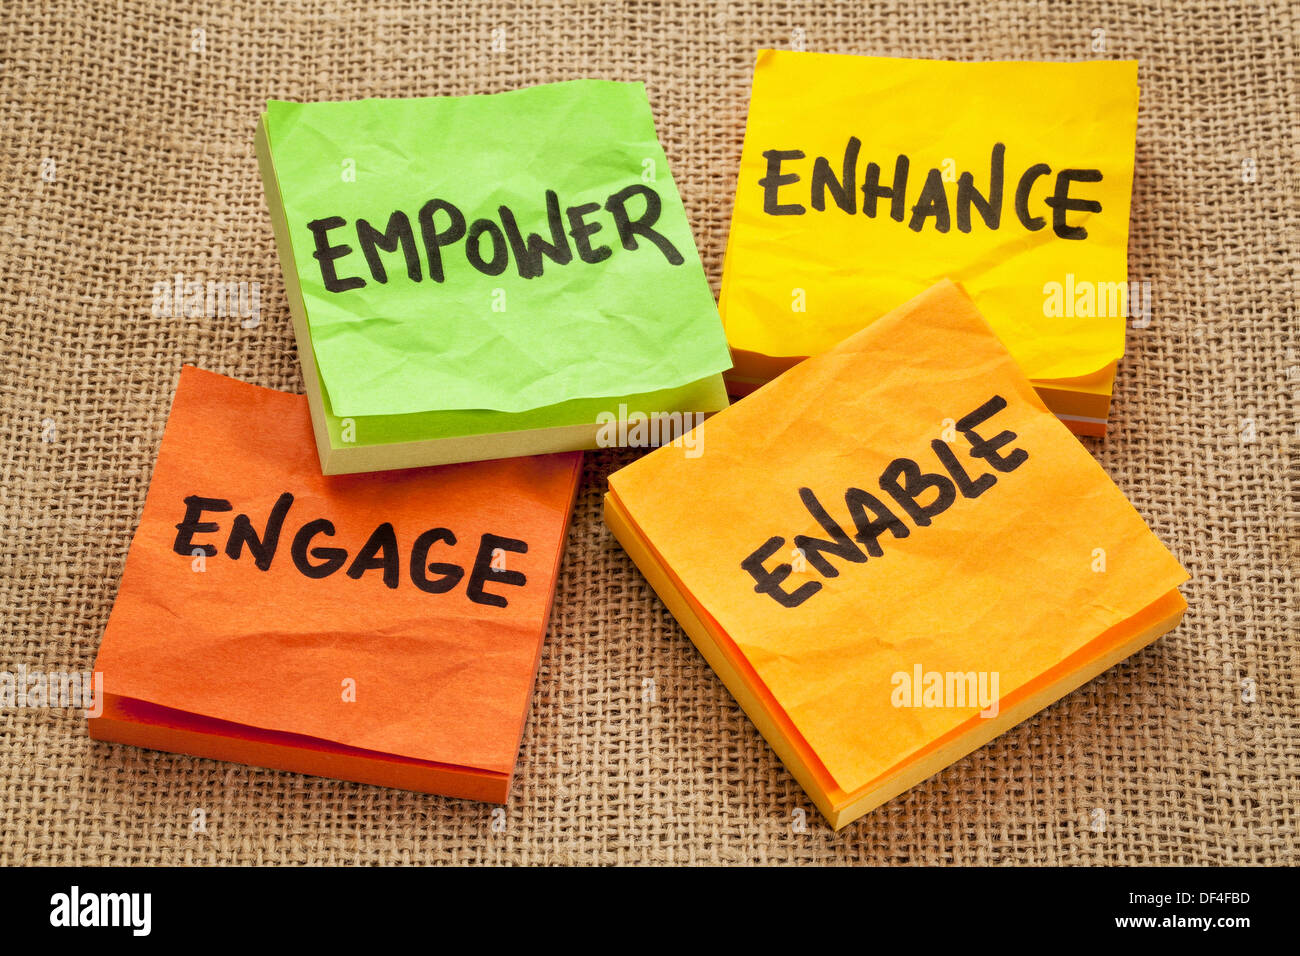 empower, enhance, enable and engage - business motivation concept - handwriting on sticky notes Stock Photo